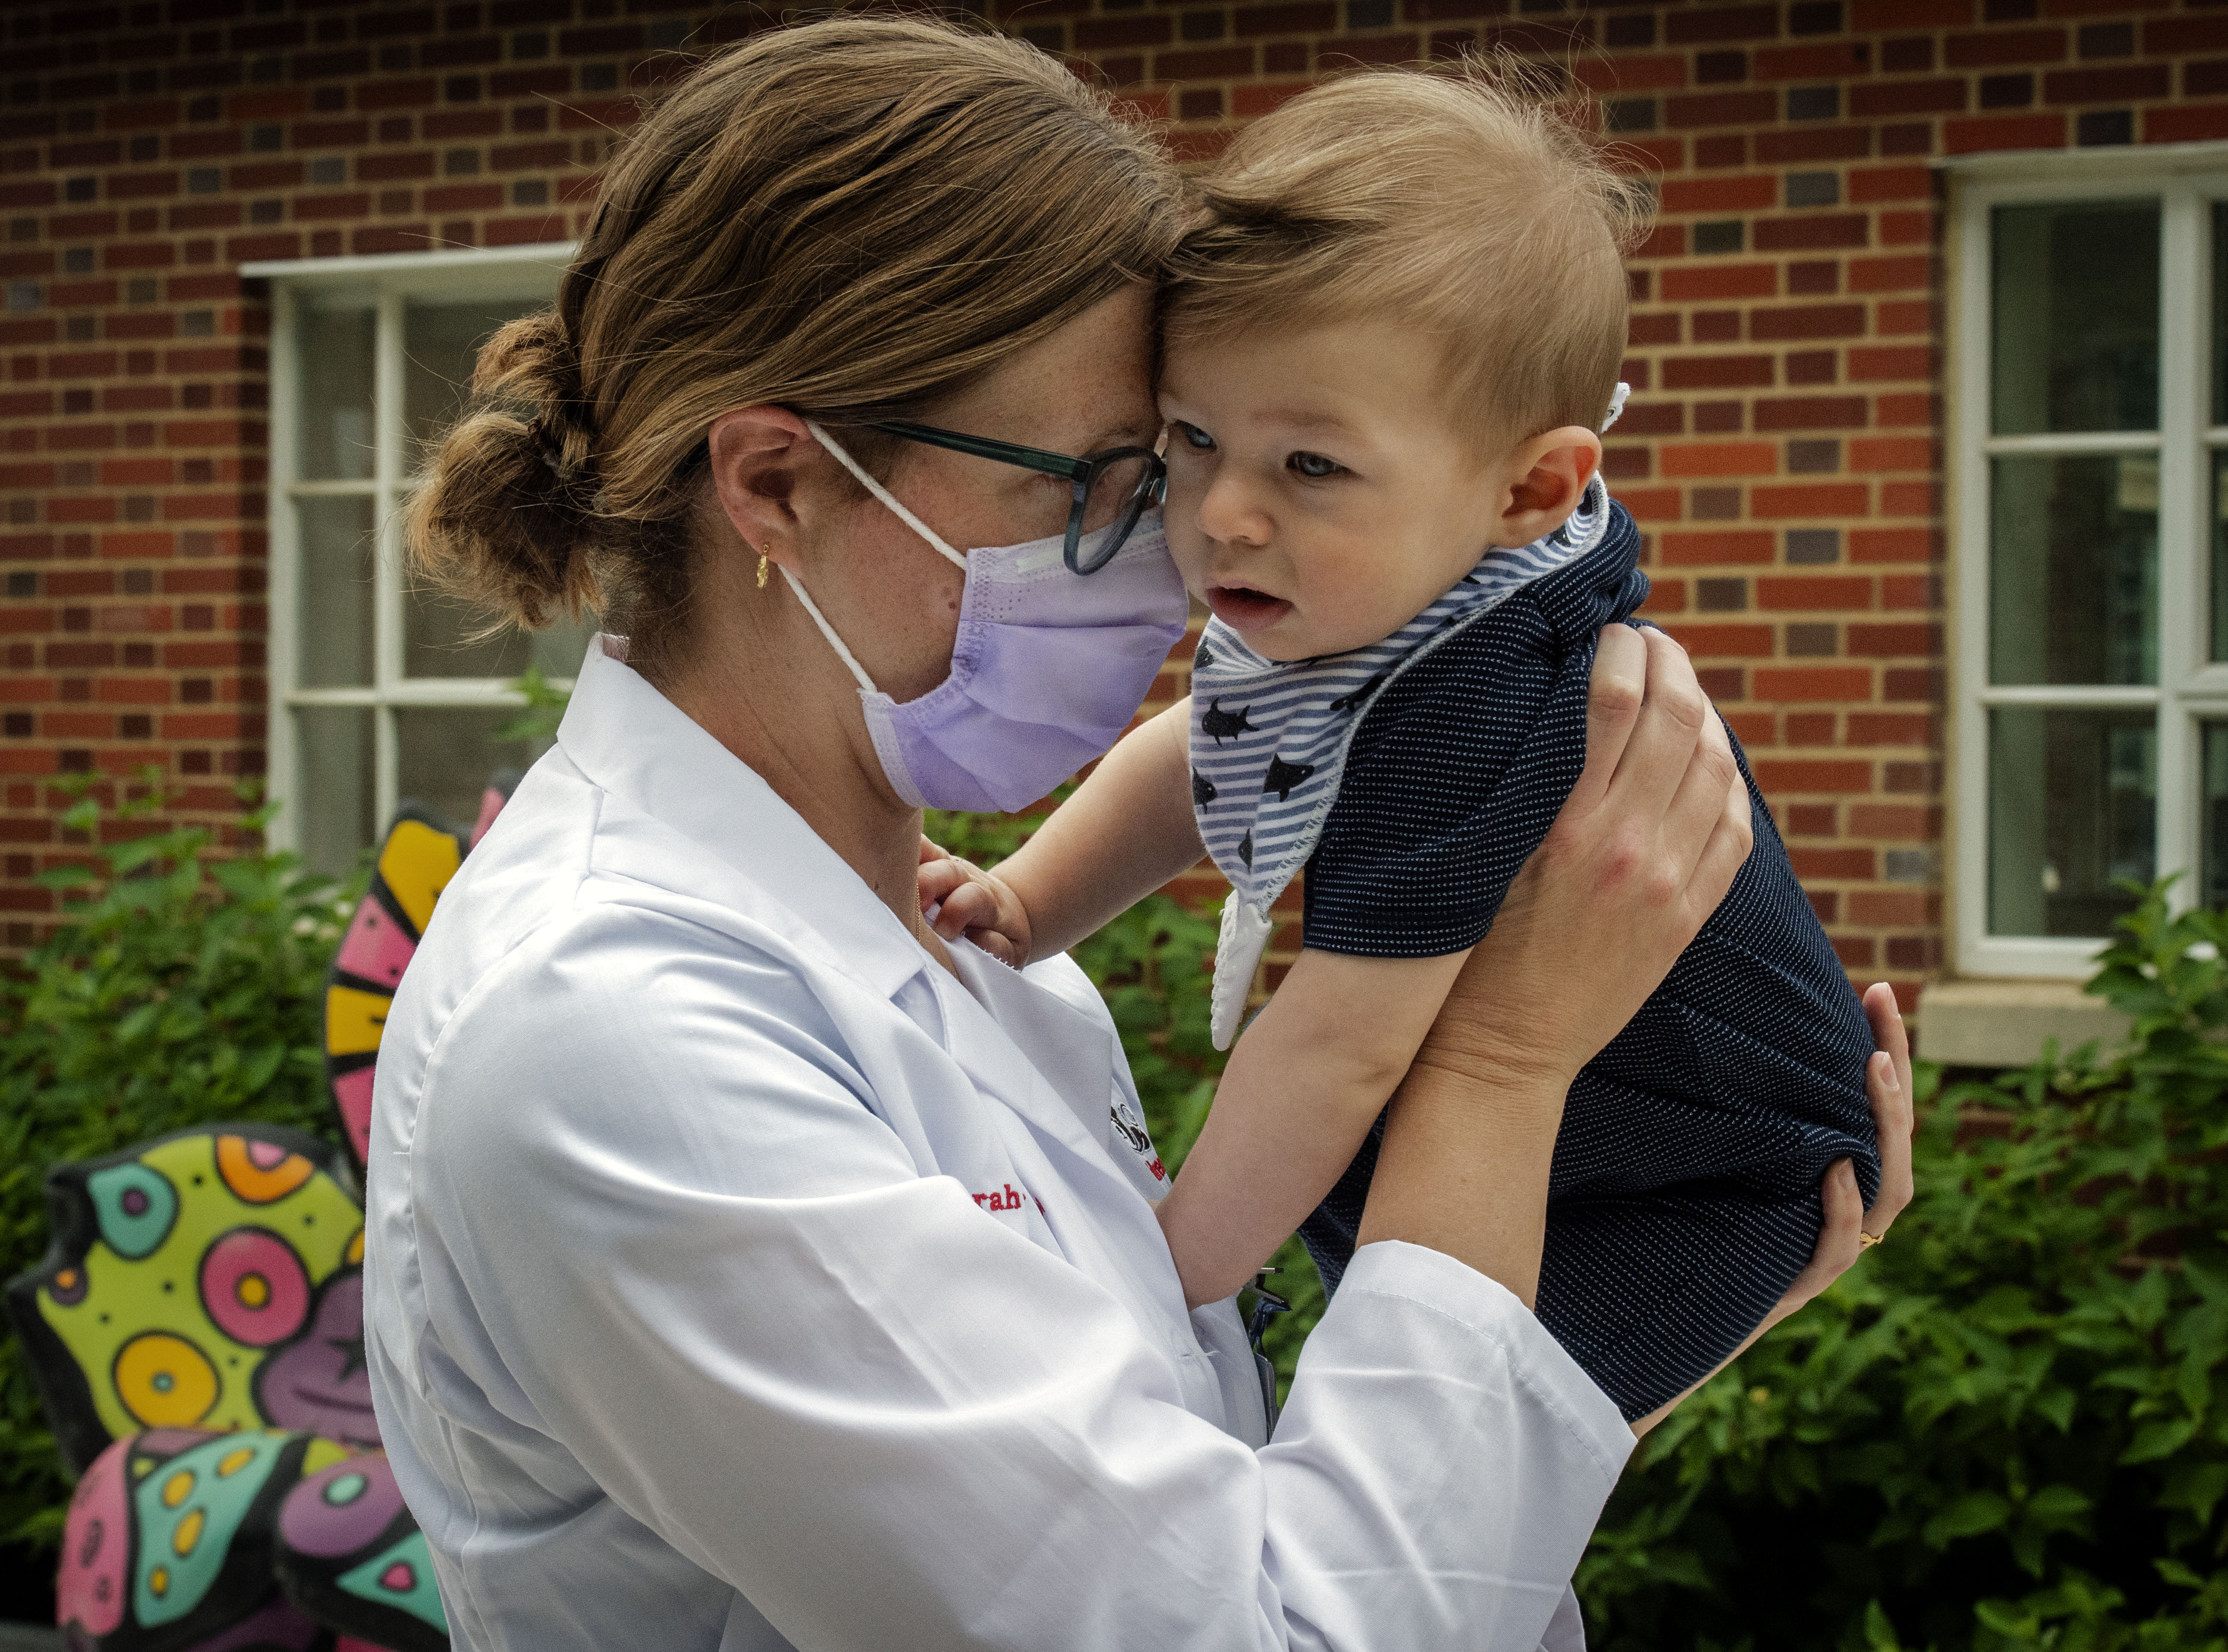 A doctor wearing a mask holding a baby outside a house.